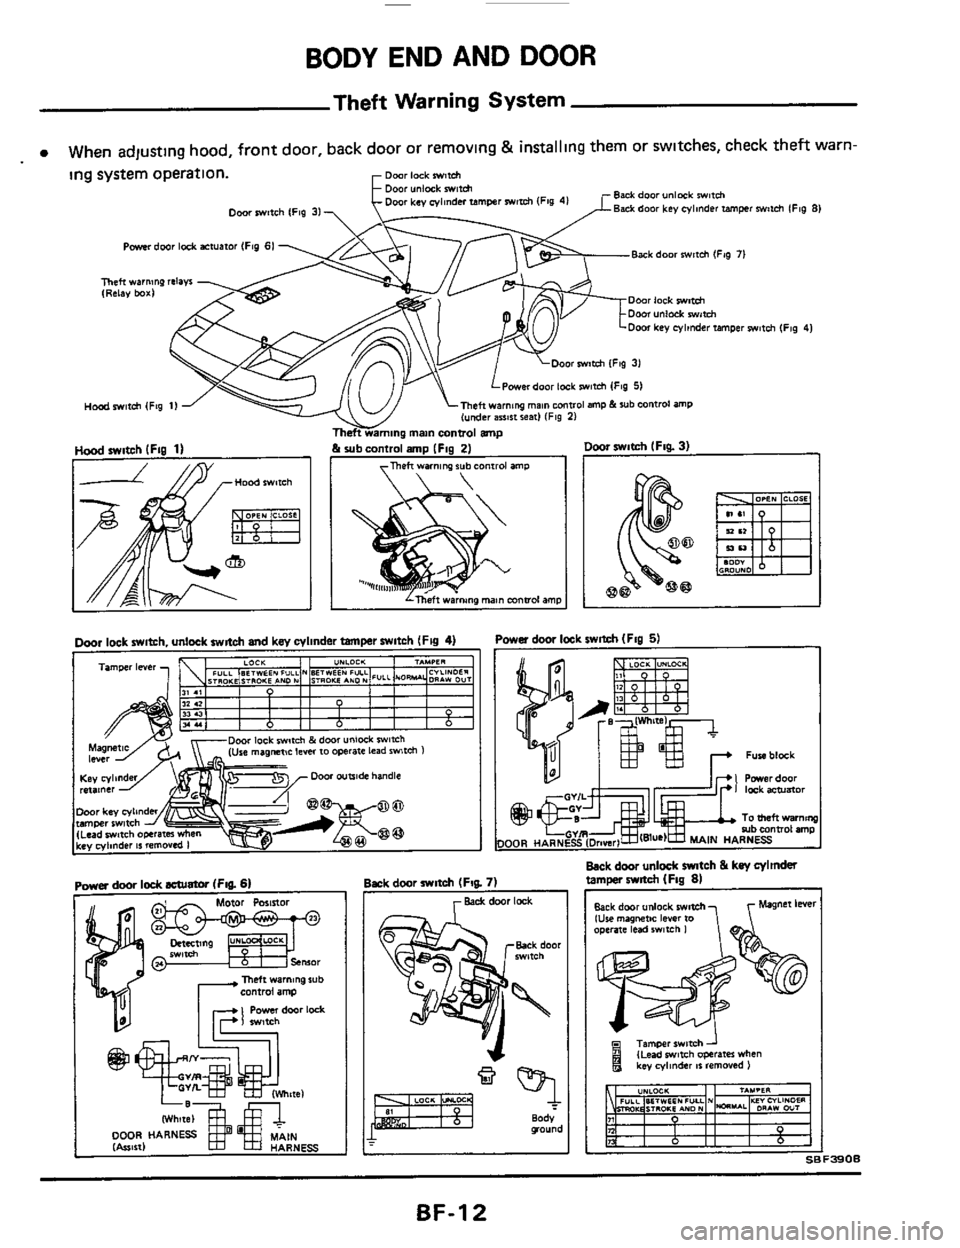 NISSAN 300ZX 1984 Z31 Body User Guide BODY END AND DOOR 
Theft Warning System 
. When  adlustlng hood, front door,  back door  or removing & installlng  them or swltches,  check theft warn- 
ing  system  operation. 
Back dooiunlkk witch 
